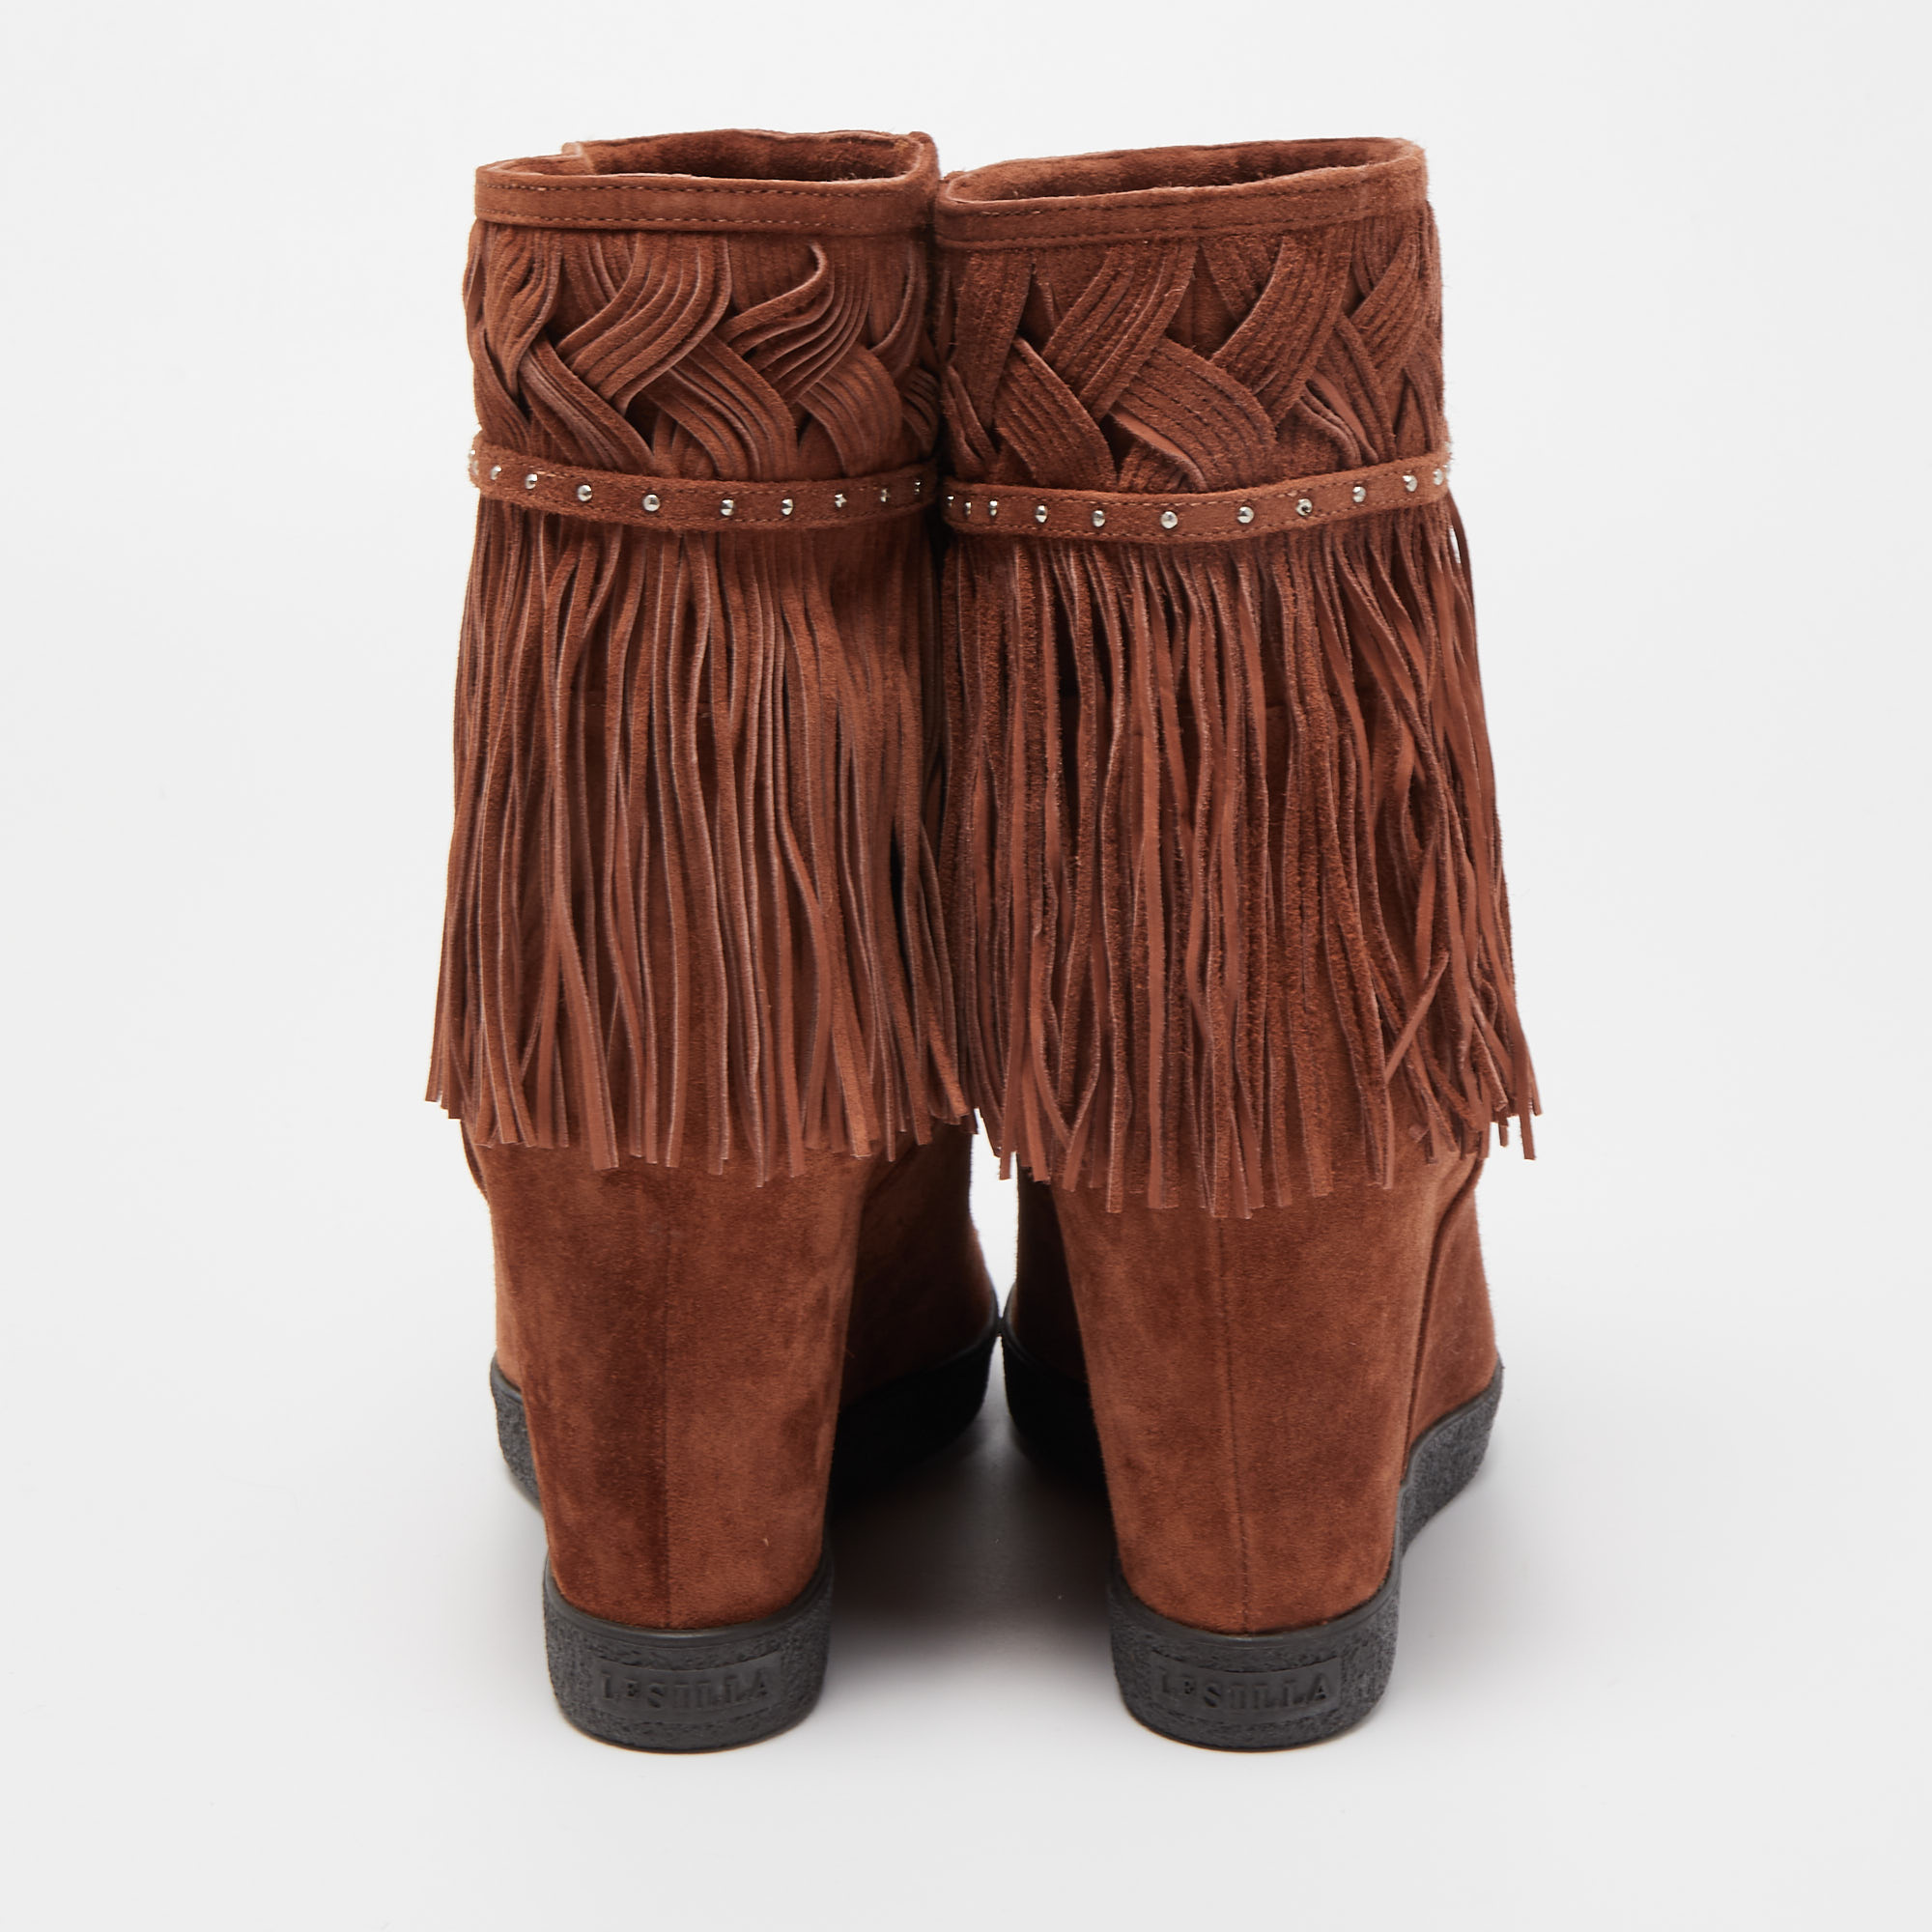 Le Silla Brown Suede Fringe Ankle Boots Size 38